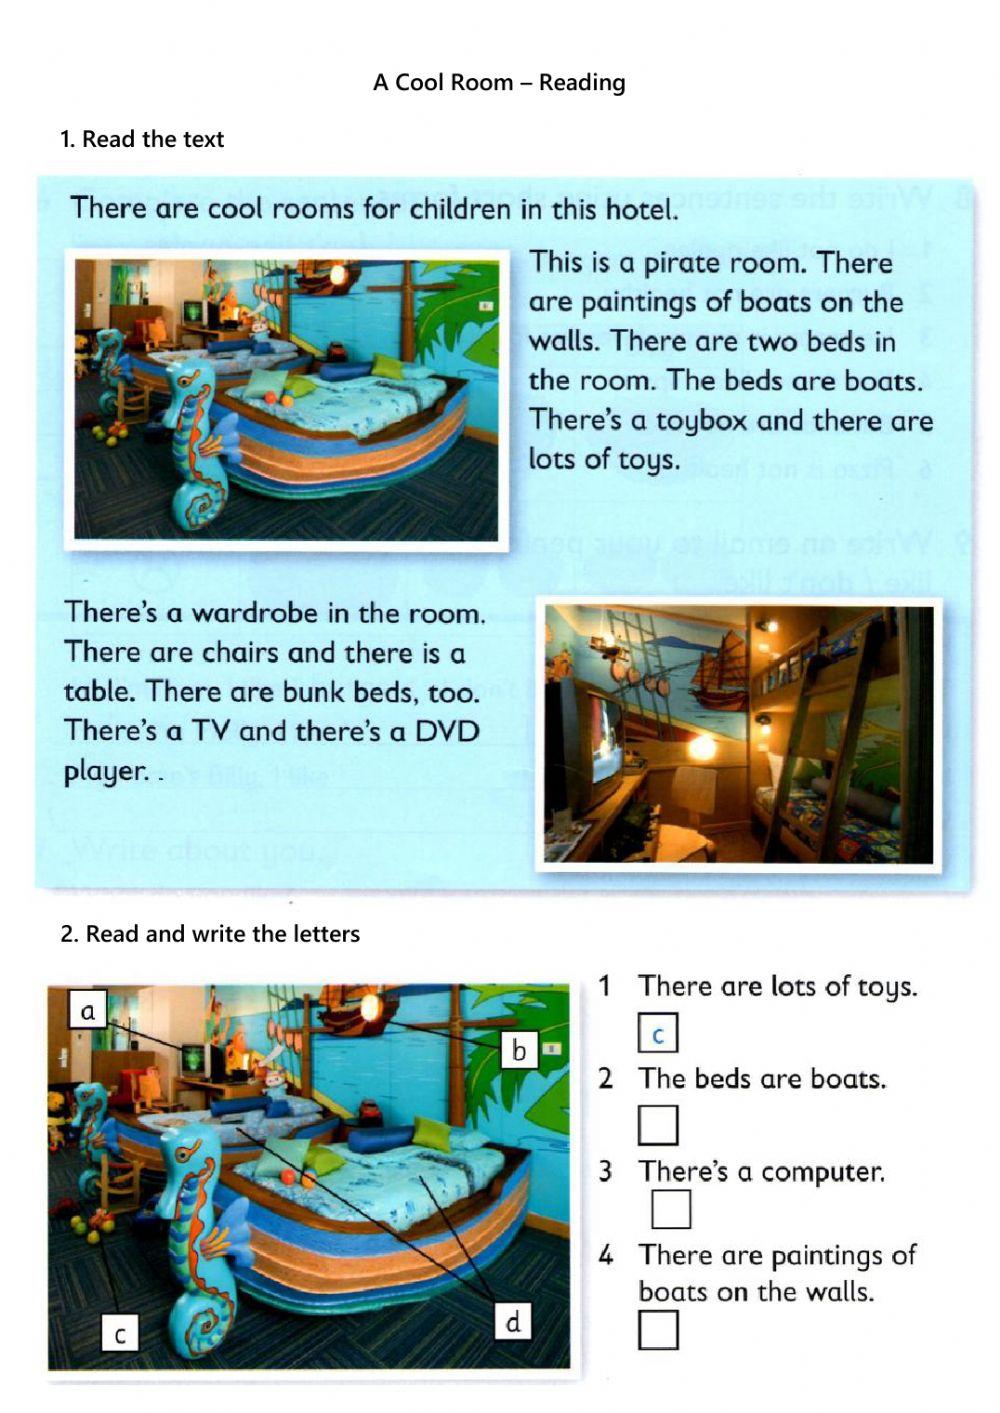 A Cool Room - Reading Comprehension